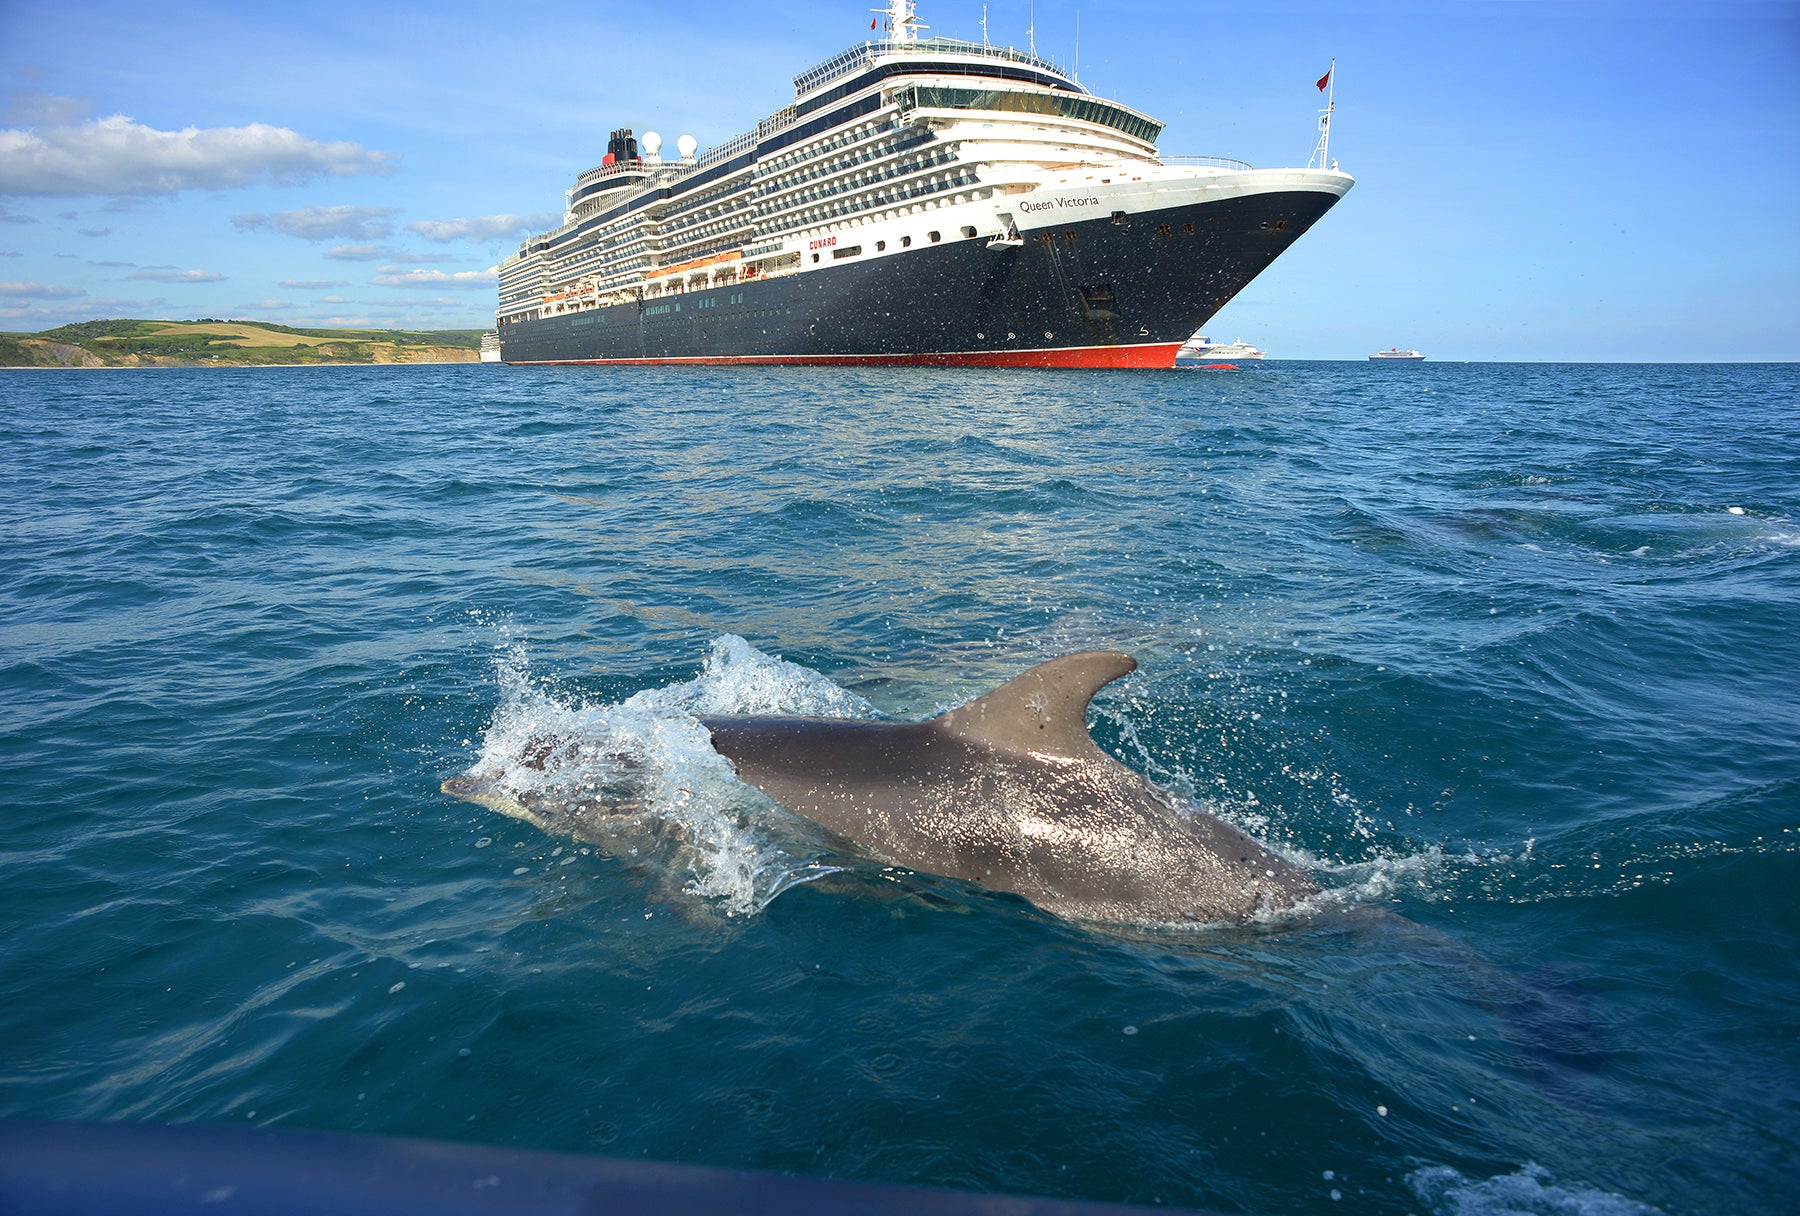 Cruise ships in quarantine and bottlenose dolphin, Weymouth Bay